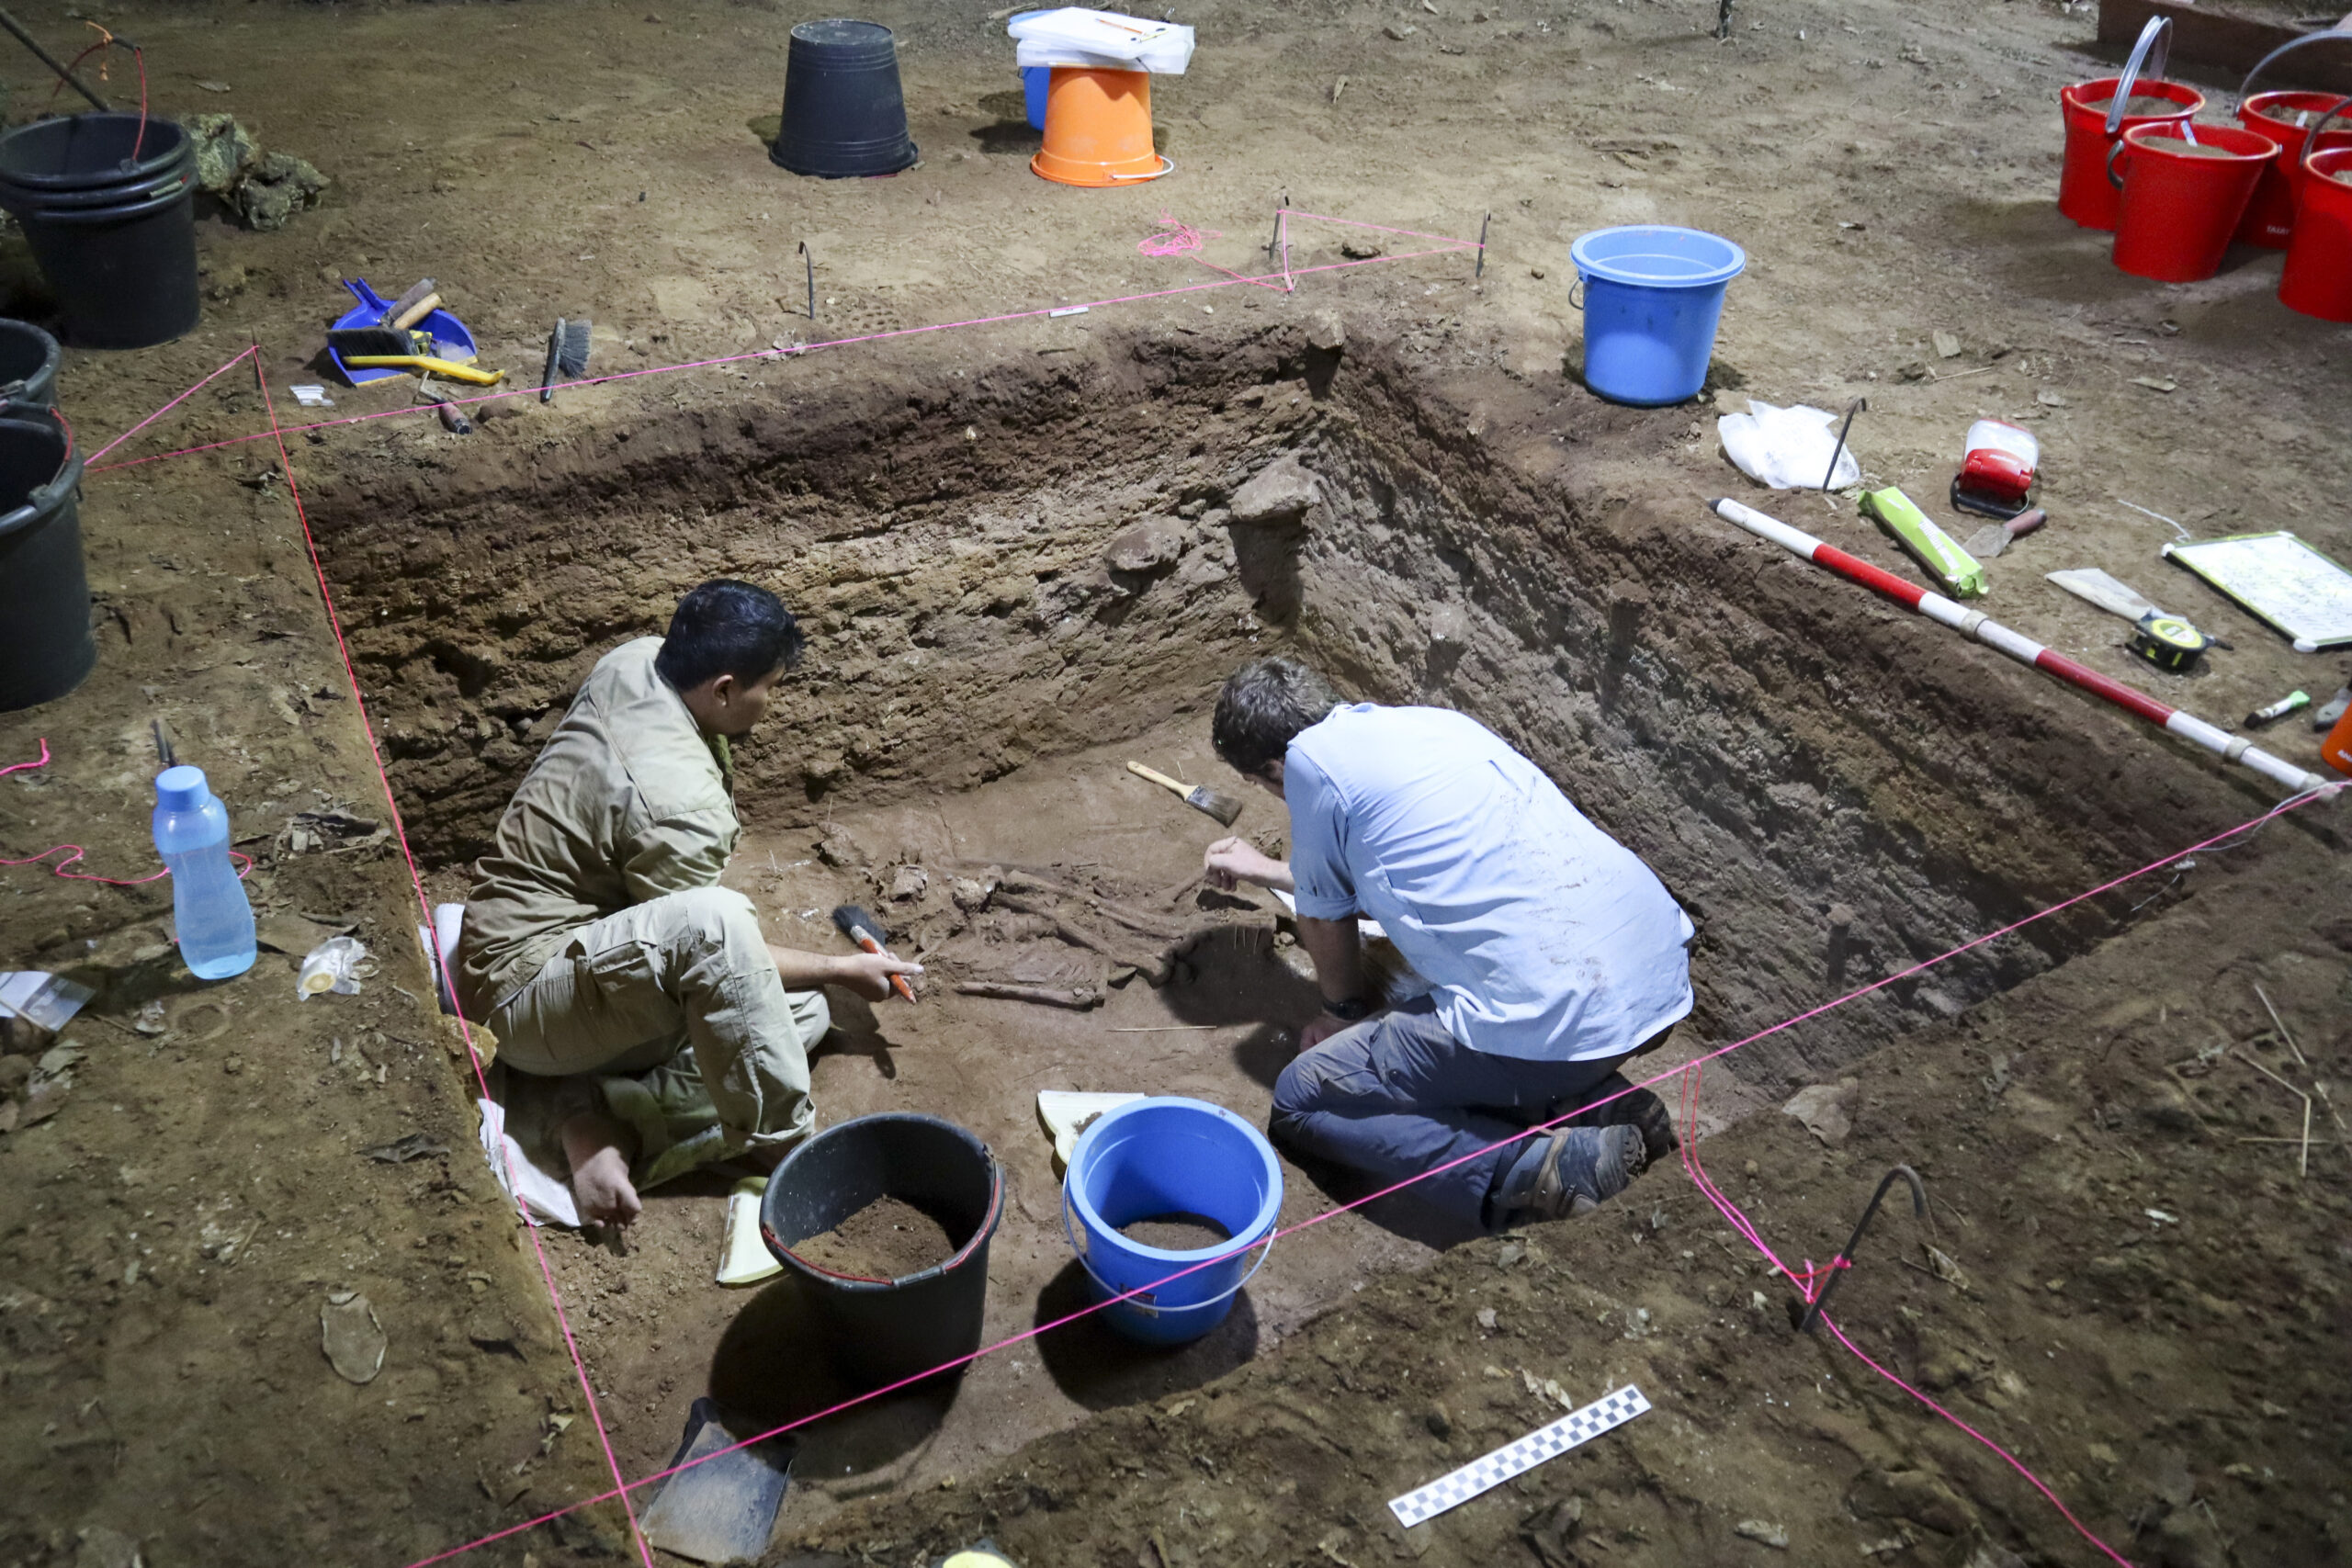 Dr Tim Maloney and Andika Priyatno work at the site in a cave in East Kalimantan, Borneo, Indonesia, March 2, 2020. The remains, which have been dated to 31,000 years old, mark the oldest evidence for amputation yet discovered. And the prehistoric “surgery” could show that humans were making medical advances much earlier than previously thought, according to the study published Wednesday, Sept. 7, 2022 in the journal Nature.(Tim Maloney/Griffith University via AP)